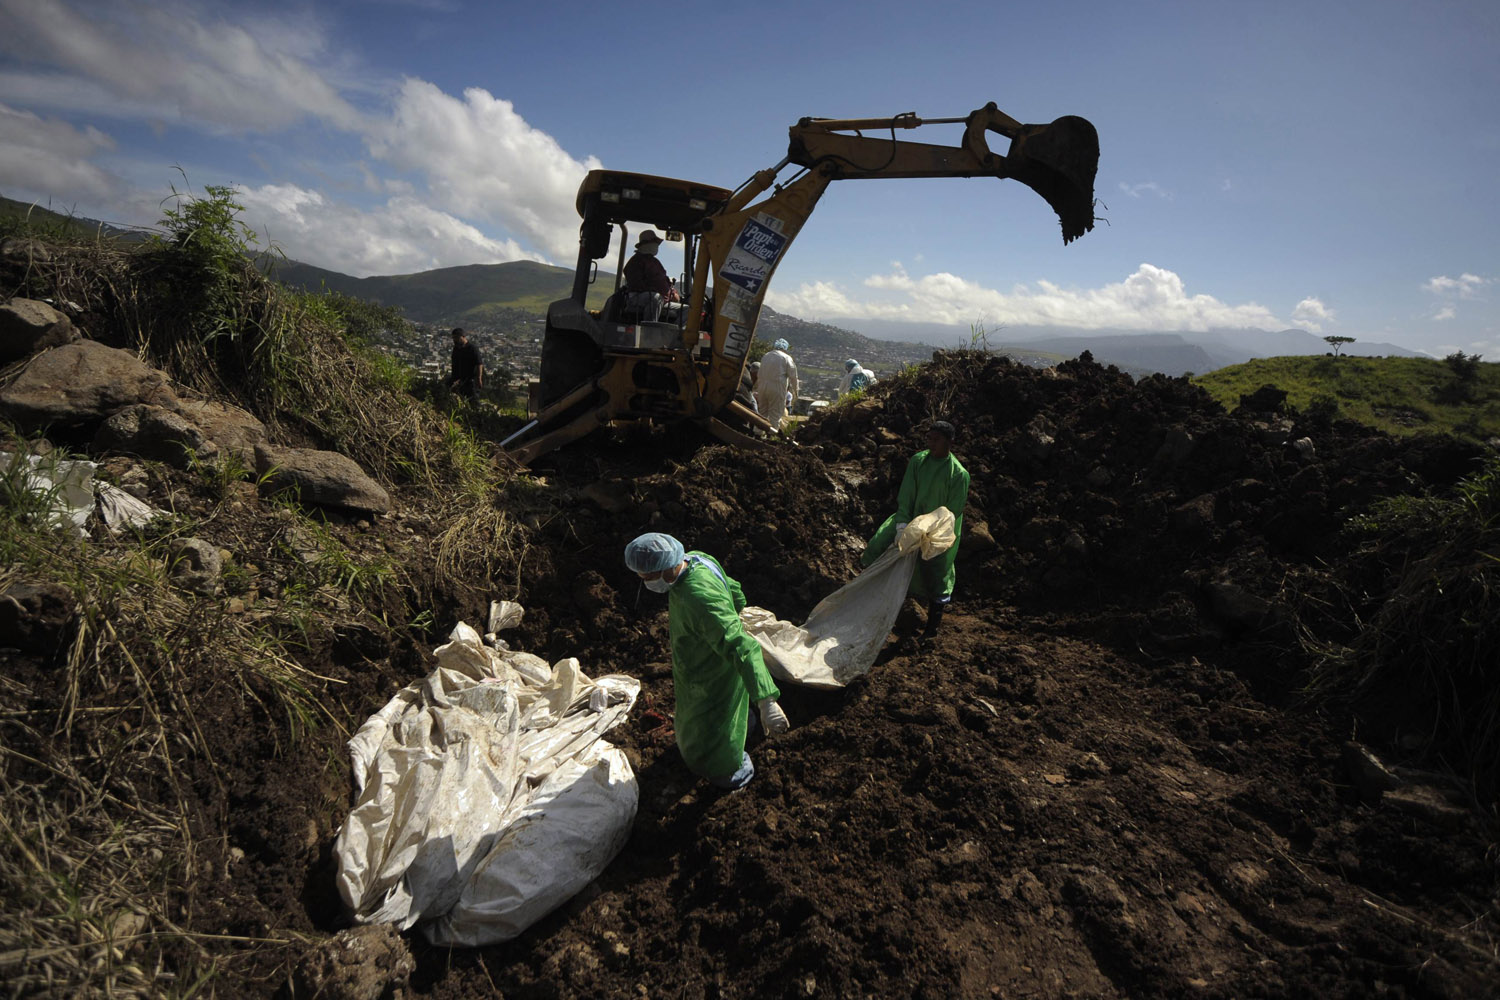 Aug. 18, 2012. Morgue workers carry a bag containing an unidentified body into a grave at Divine Paradise cemetery in Tegucigalpa.